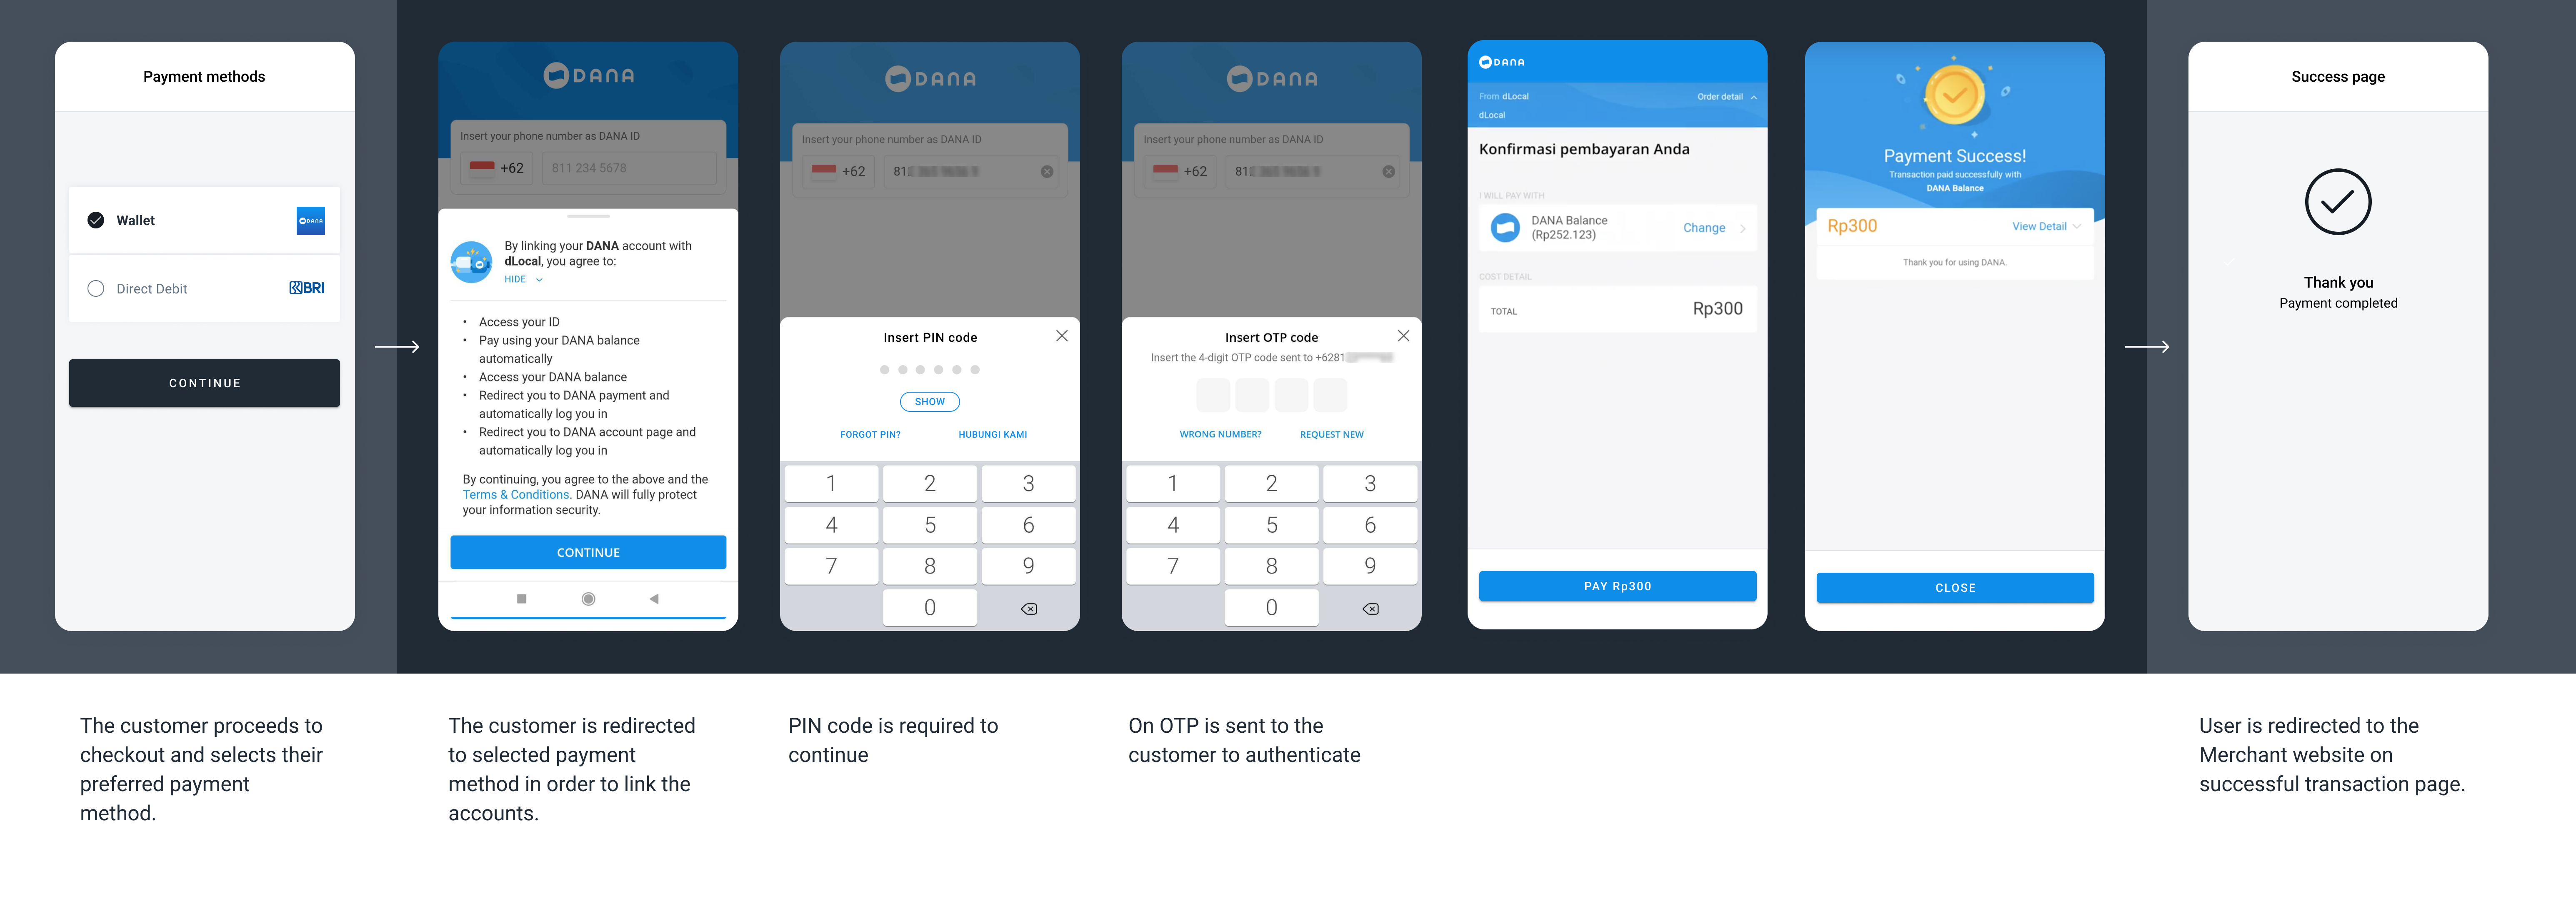 The screenshots illustrate a generic Recurring payment redirect flow using Dana wallet. The specifics of the flow can change depending on the payment method selected to complete the transaction.